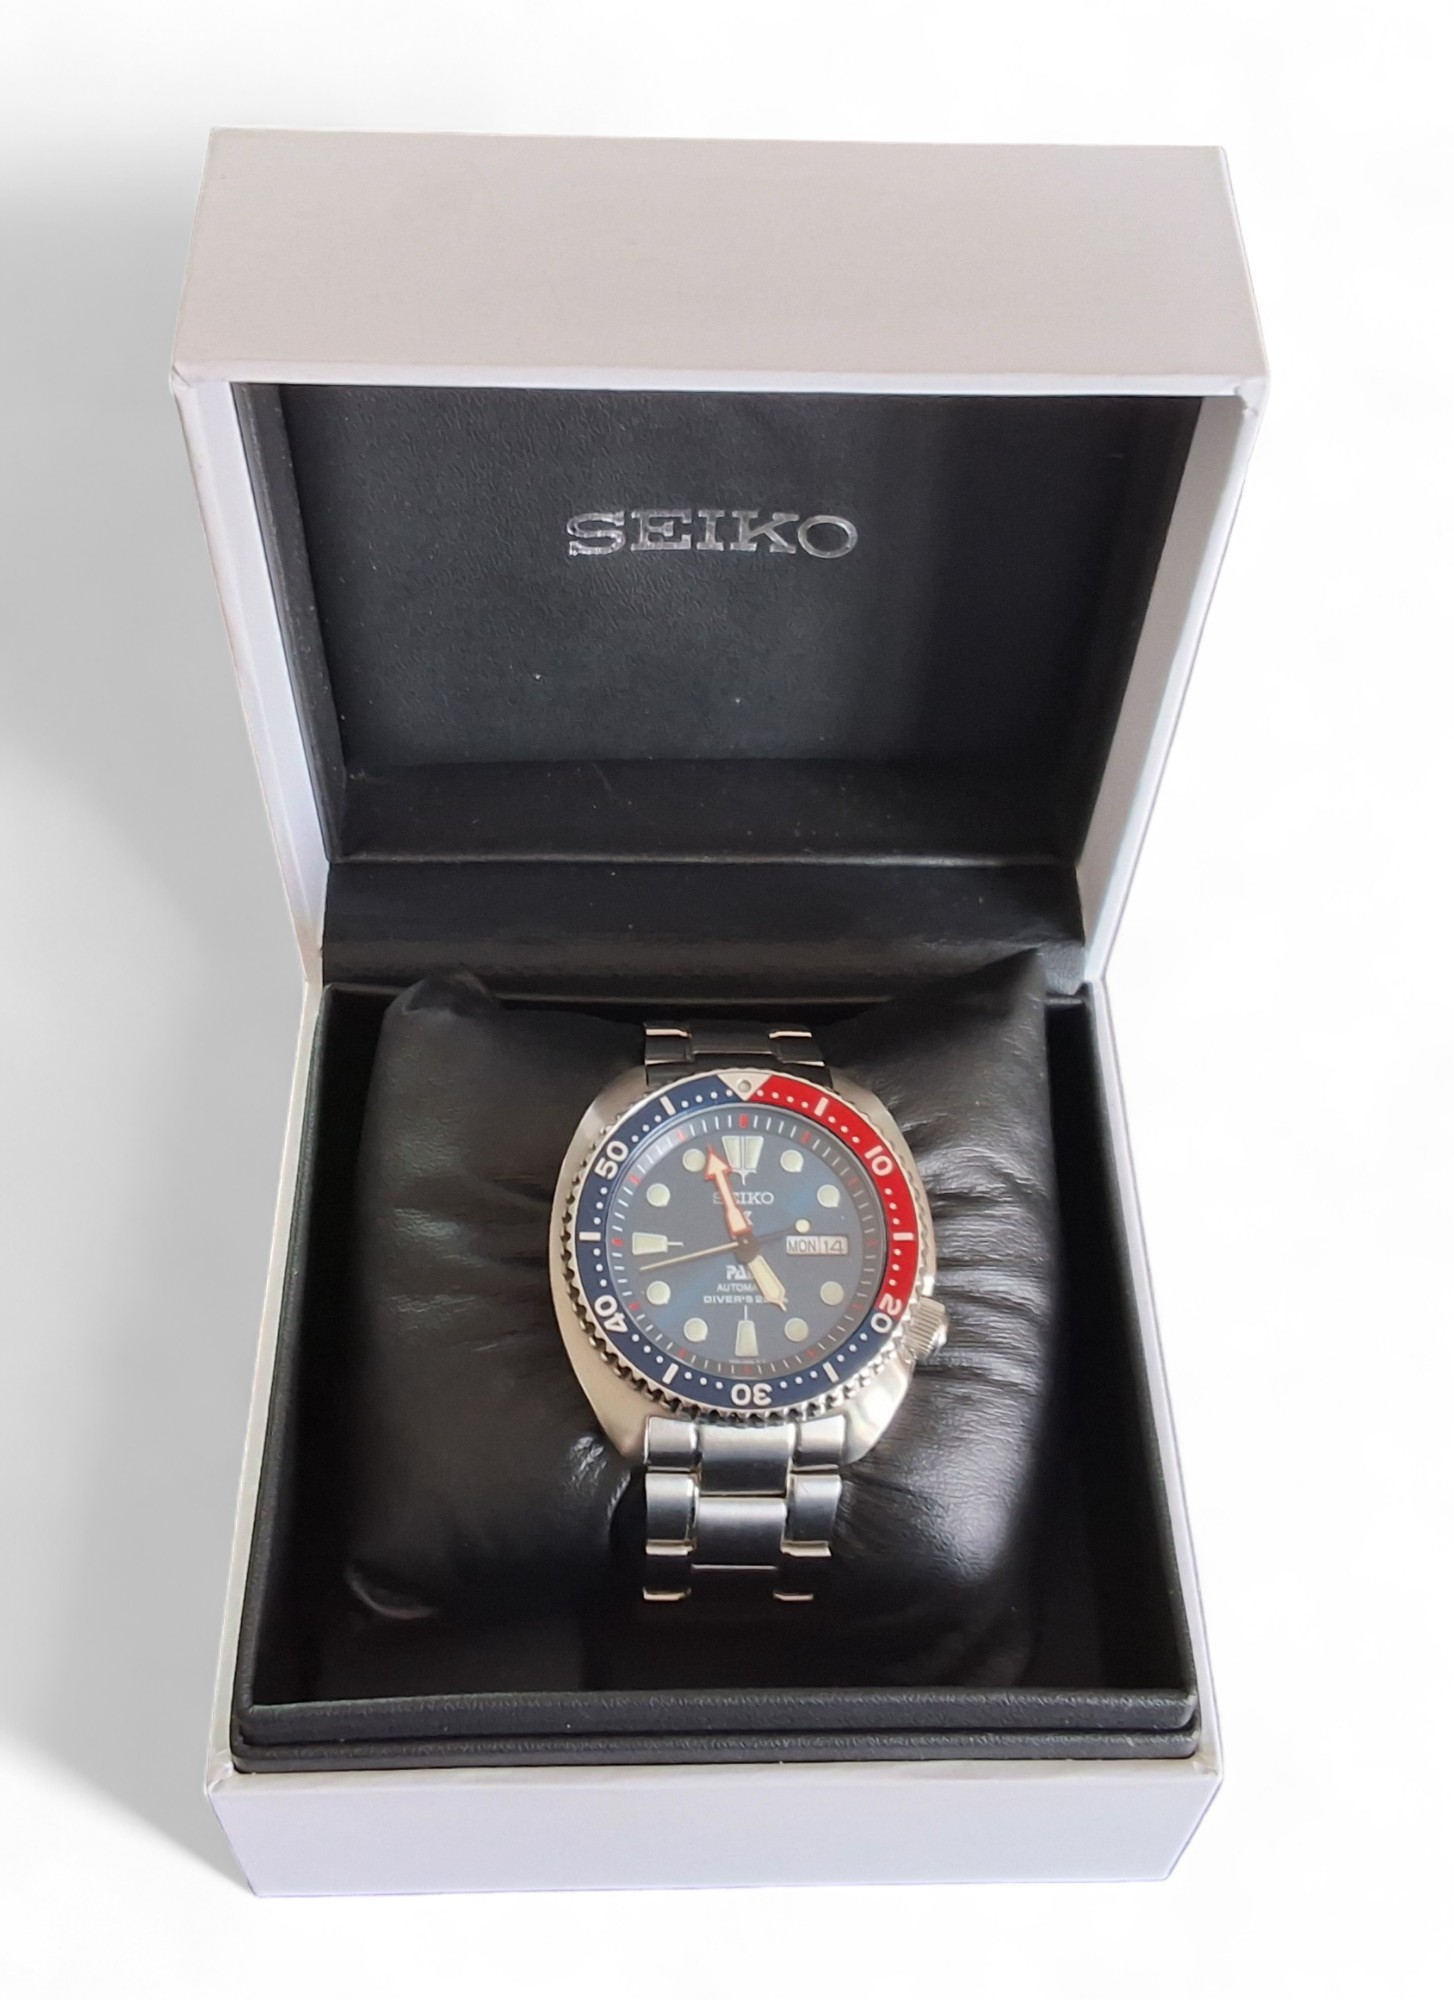 A Seiko Prospex Padi, special edition, Divers 200m, automatic, gents, stainless steel wristwatch - Image 3 of 3